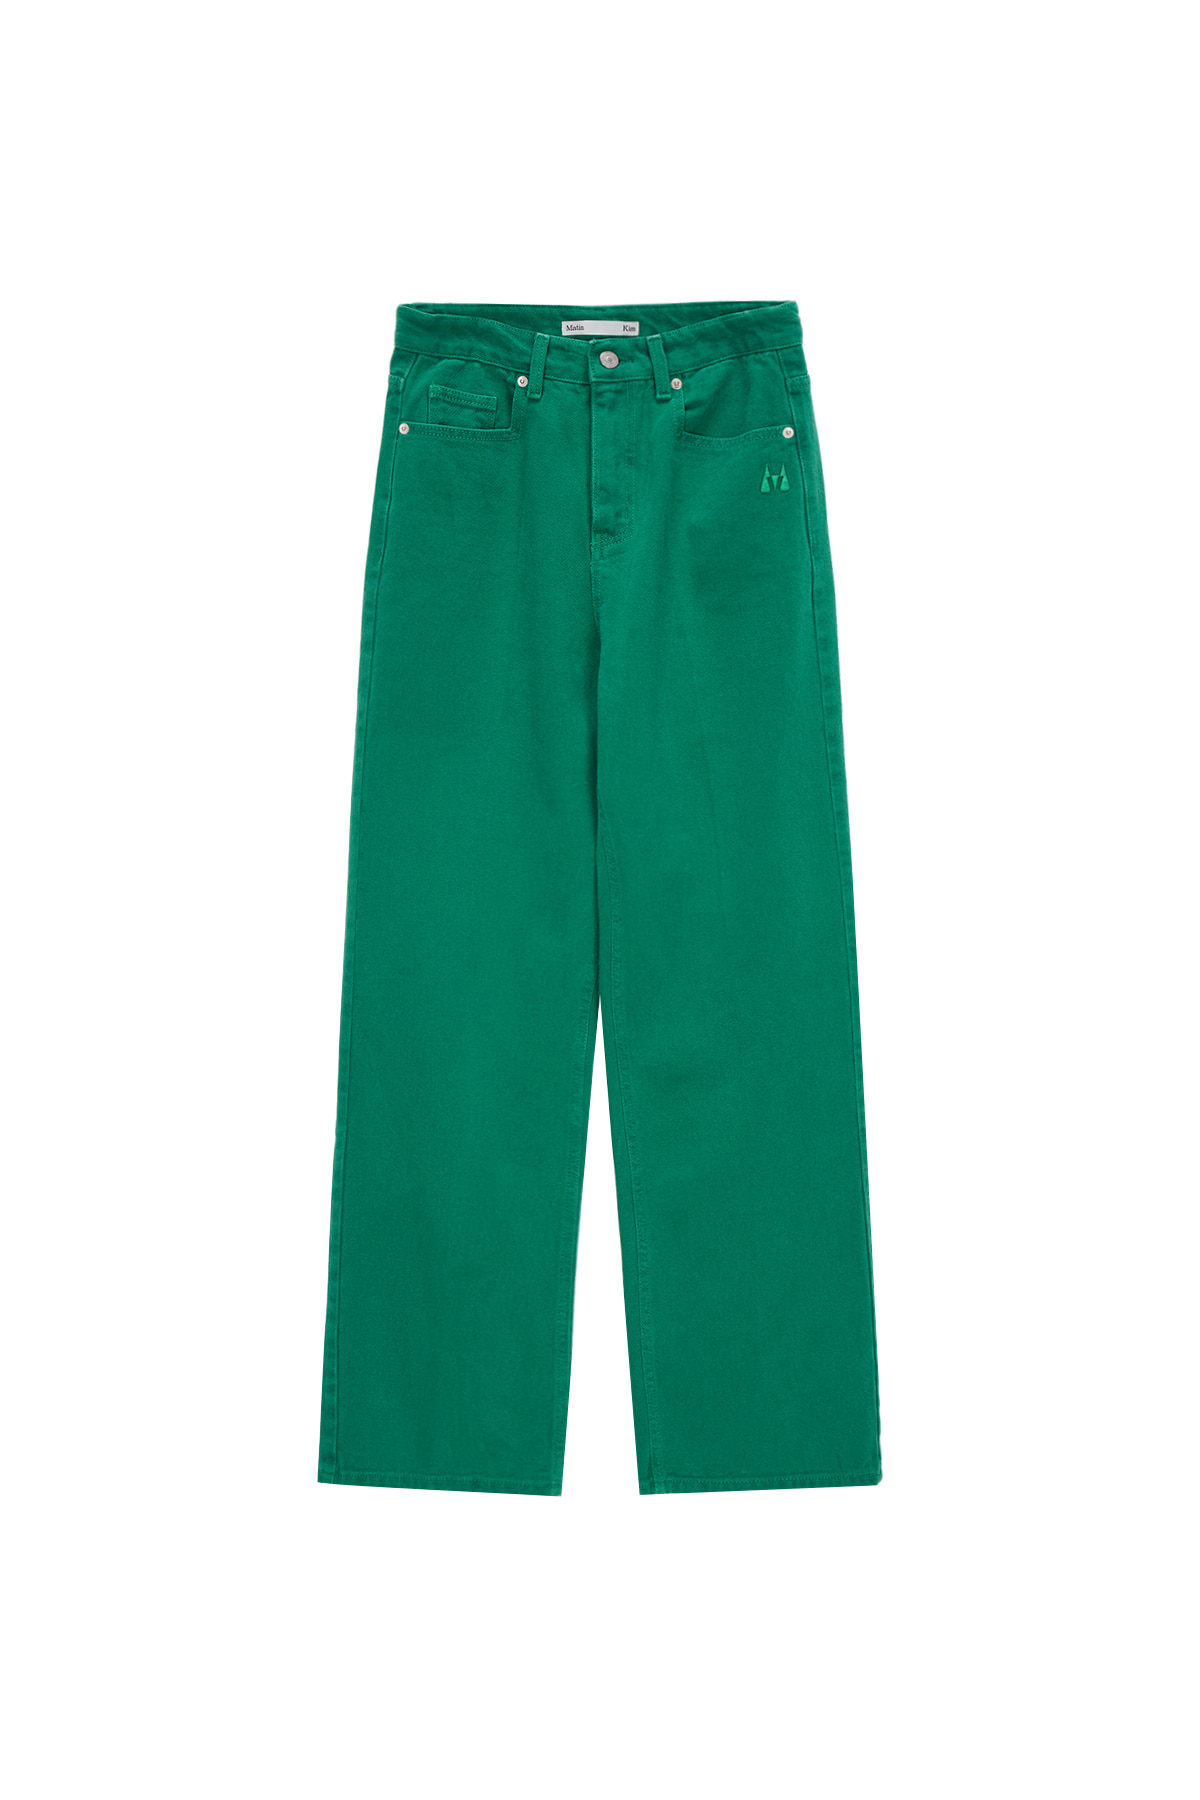 COLOR DYEING STRAIGHT PANTS IN GREEN